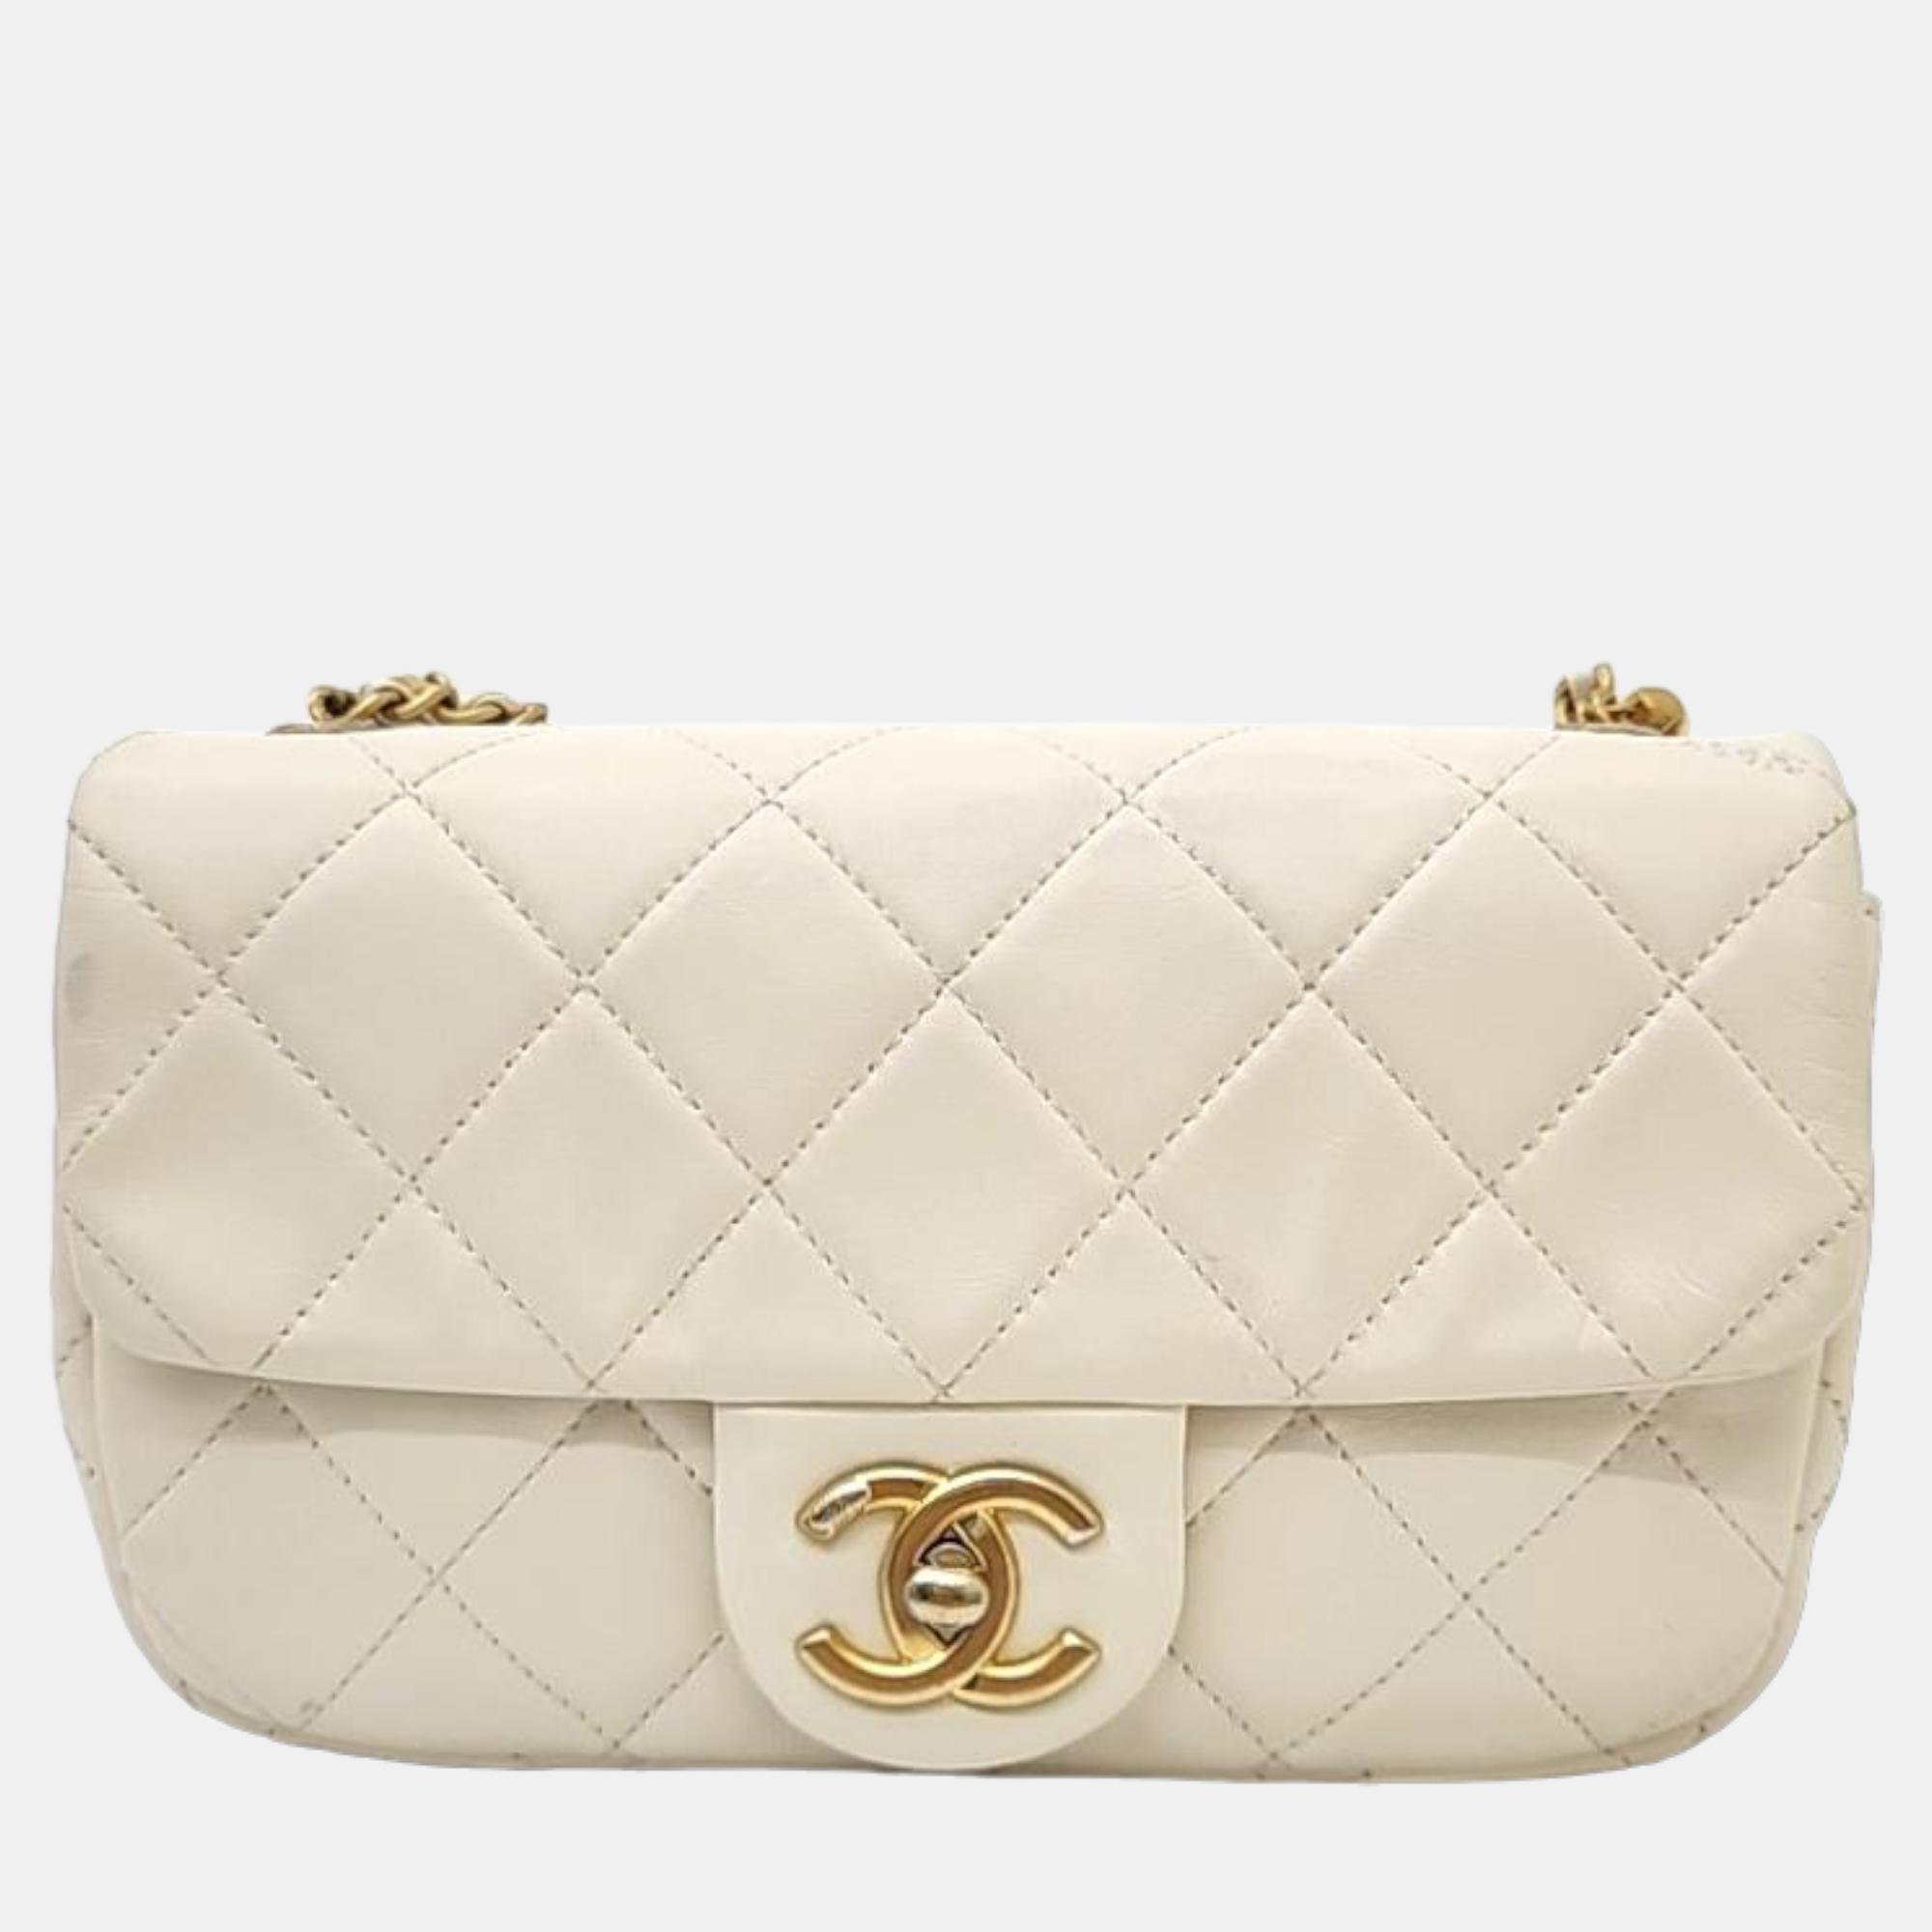 Chanel white leather pearl chain cross bag